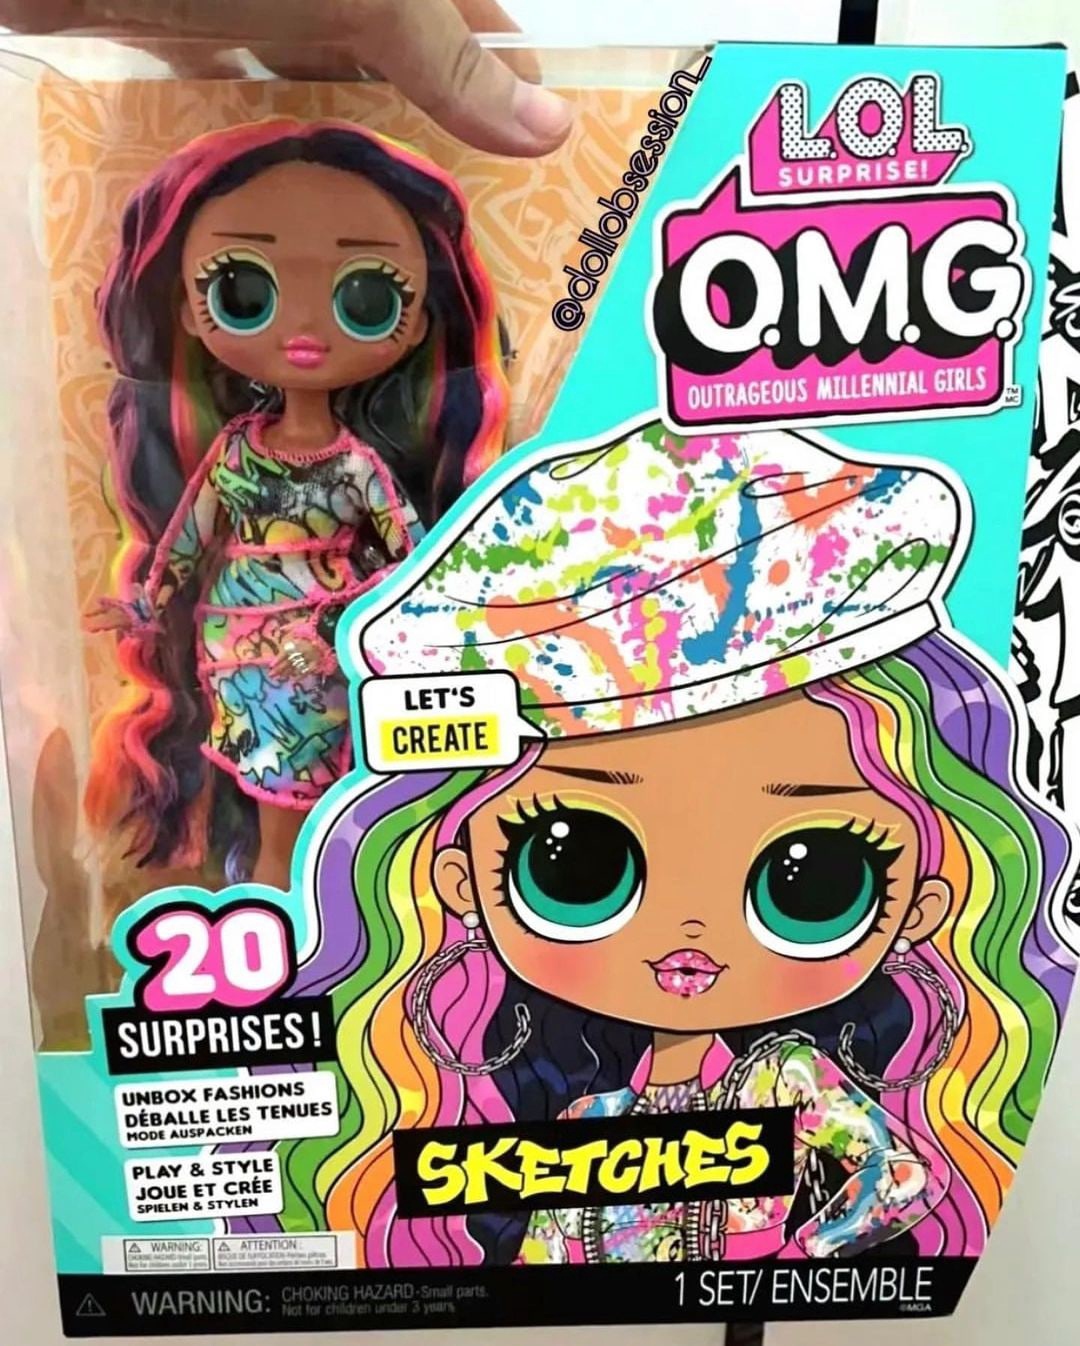 LOL OMG Series 6 dolls: Melrose and Sketches 